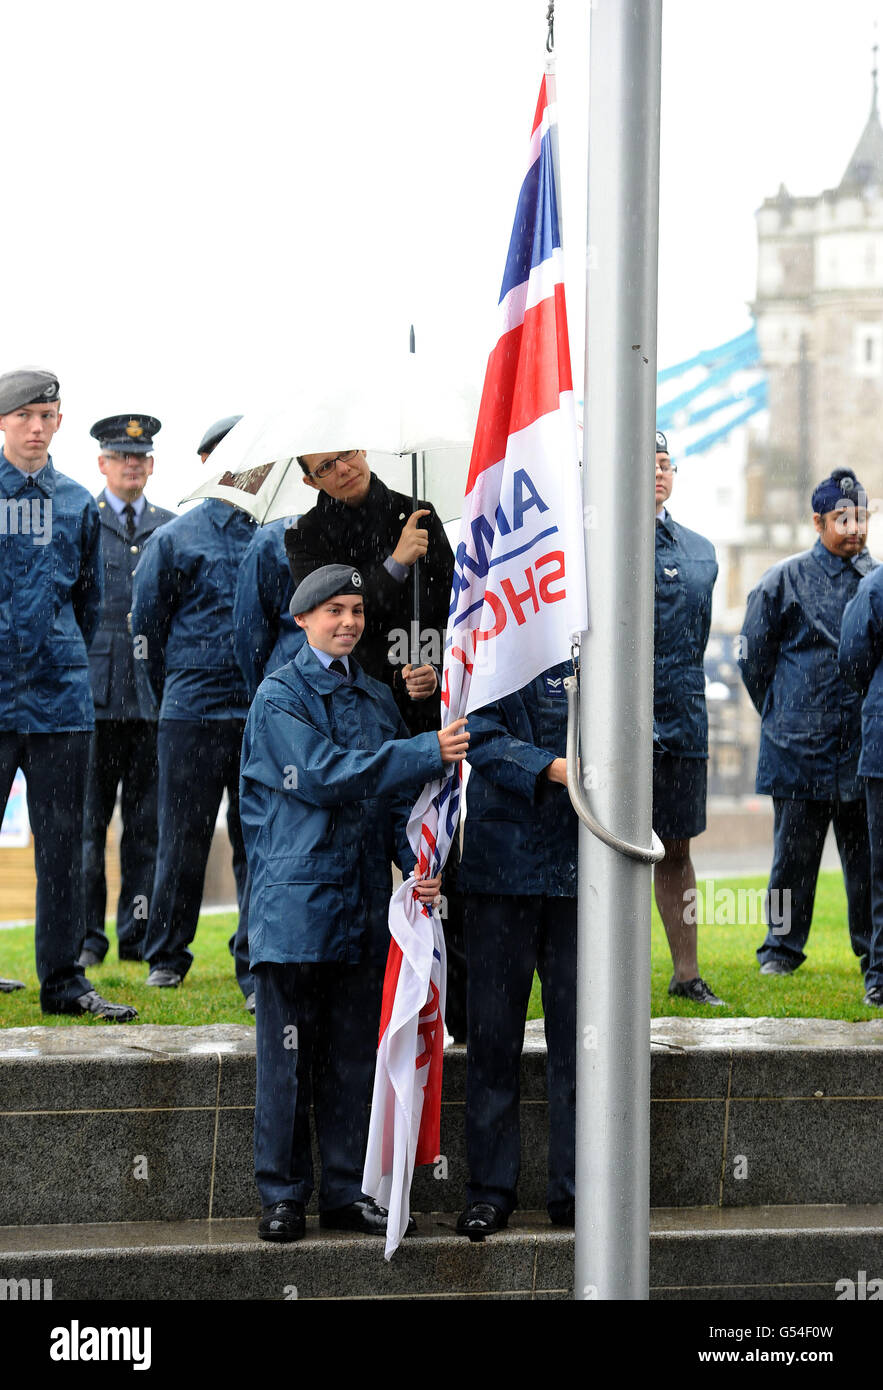 Cadets stand in the pouring rain as they raise the Armed Forces flag during a flag-raising ceremony at City Hall, London, to mark the start of a week of celebrations ahead of Armed Forces Day on June 25. Stock Photo